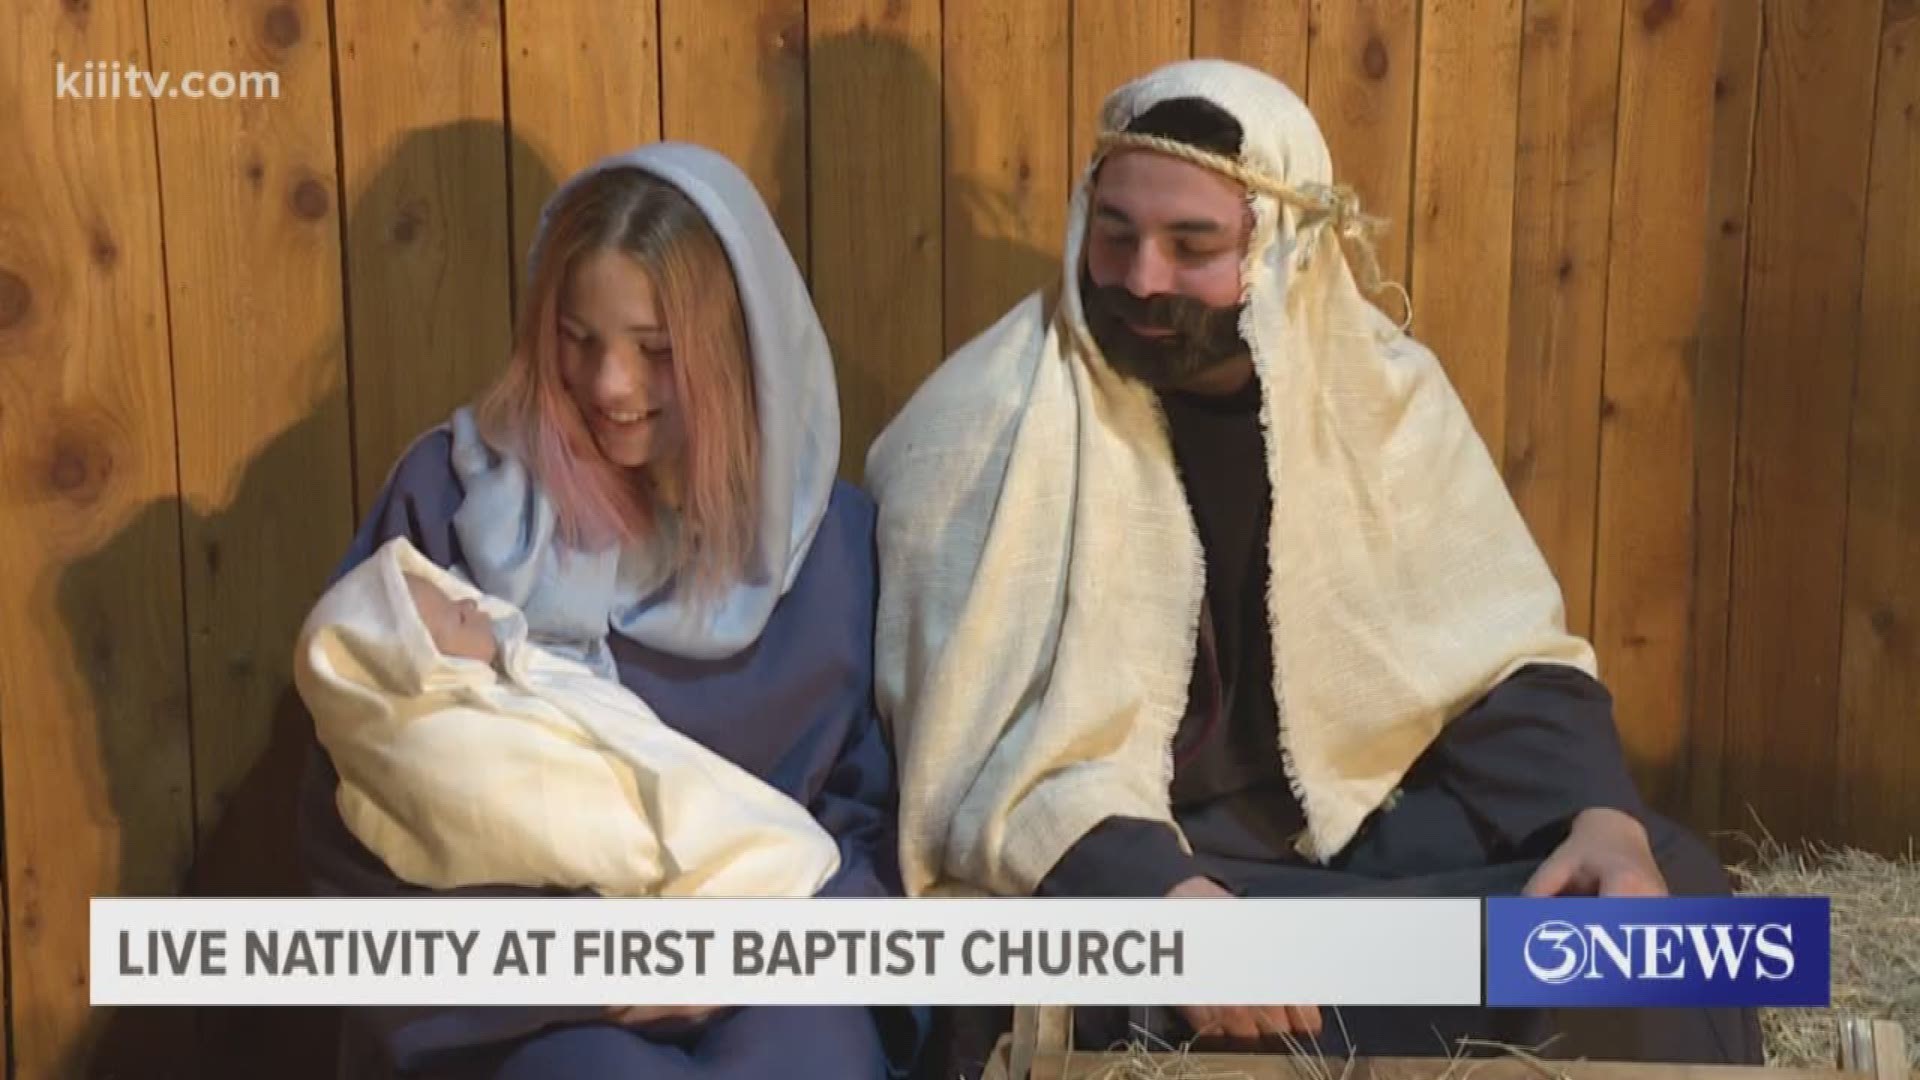 The Church wanted to host to remind the community the true meaning of Christmas.